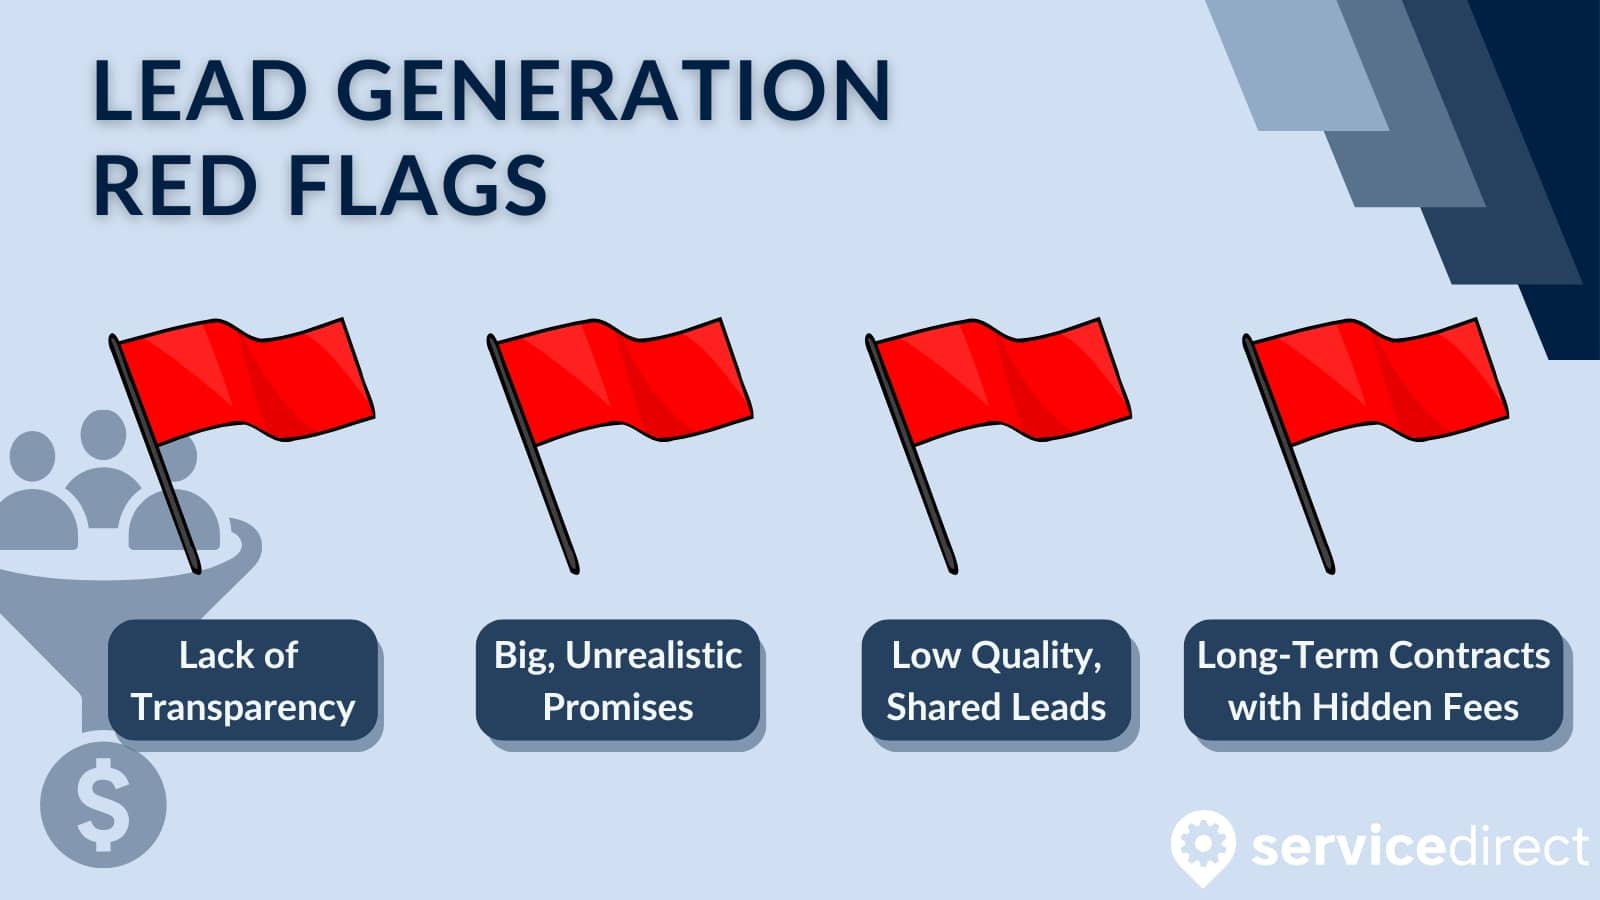 The red flags for lead generation companies include no transparency, unrealistic promises, low quality leads, and hidden fees.